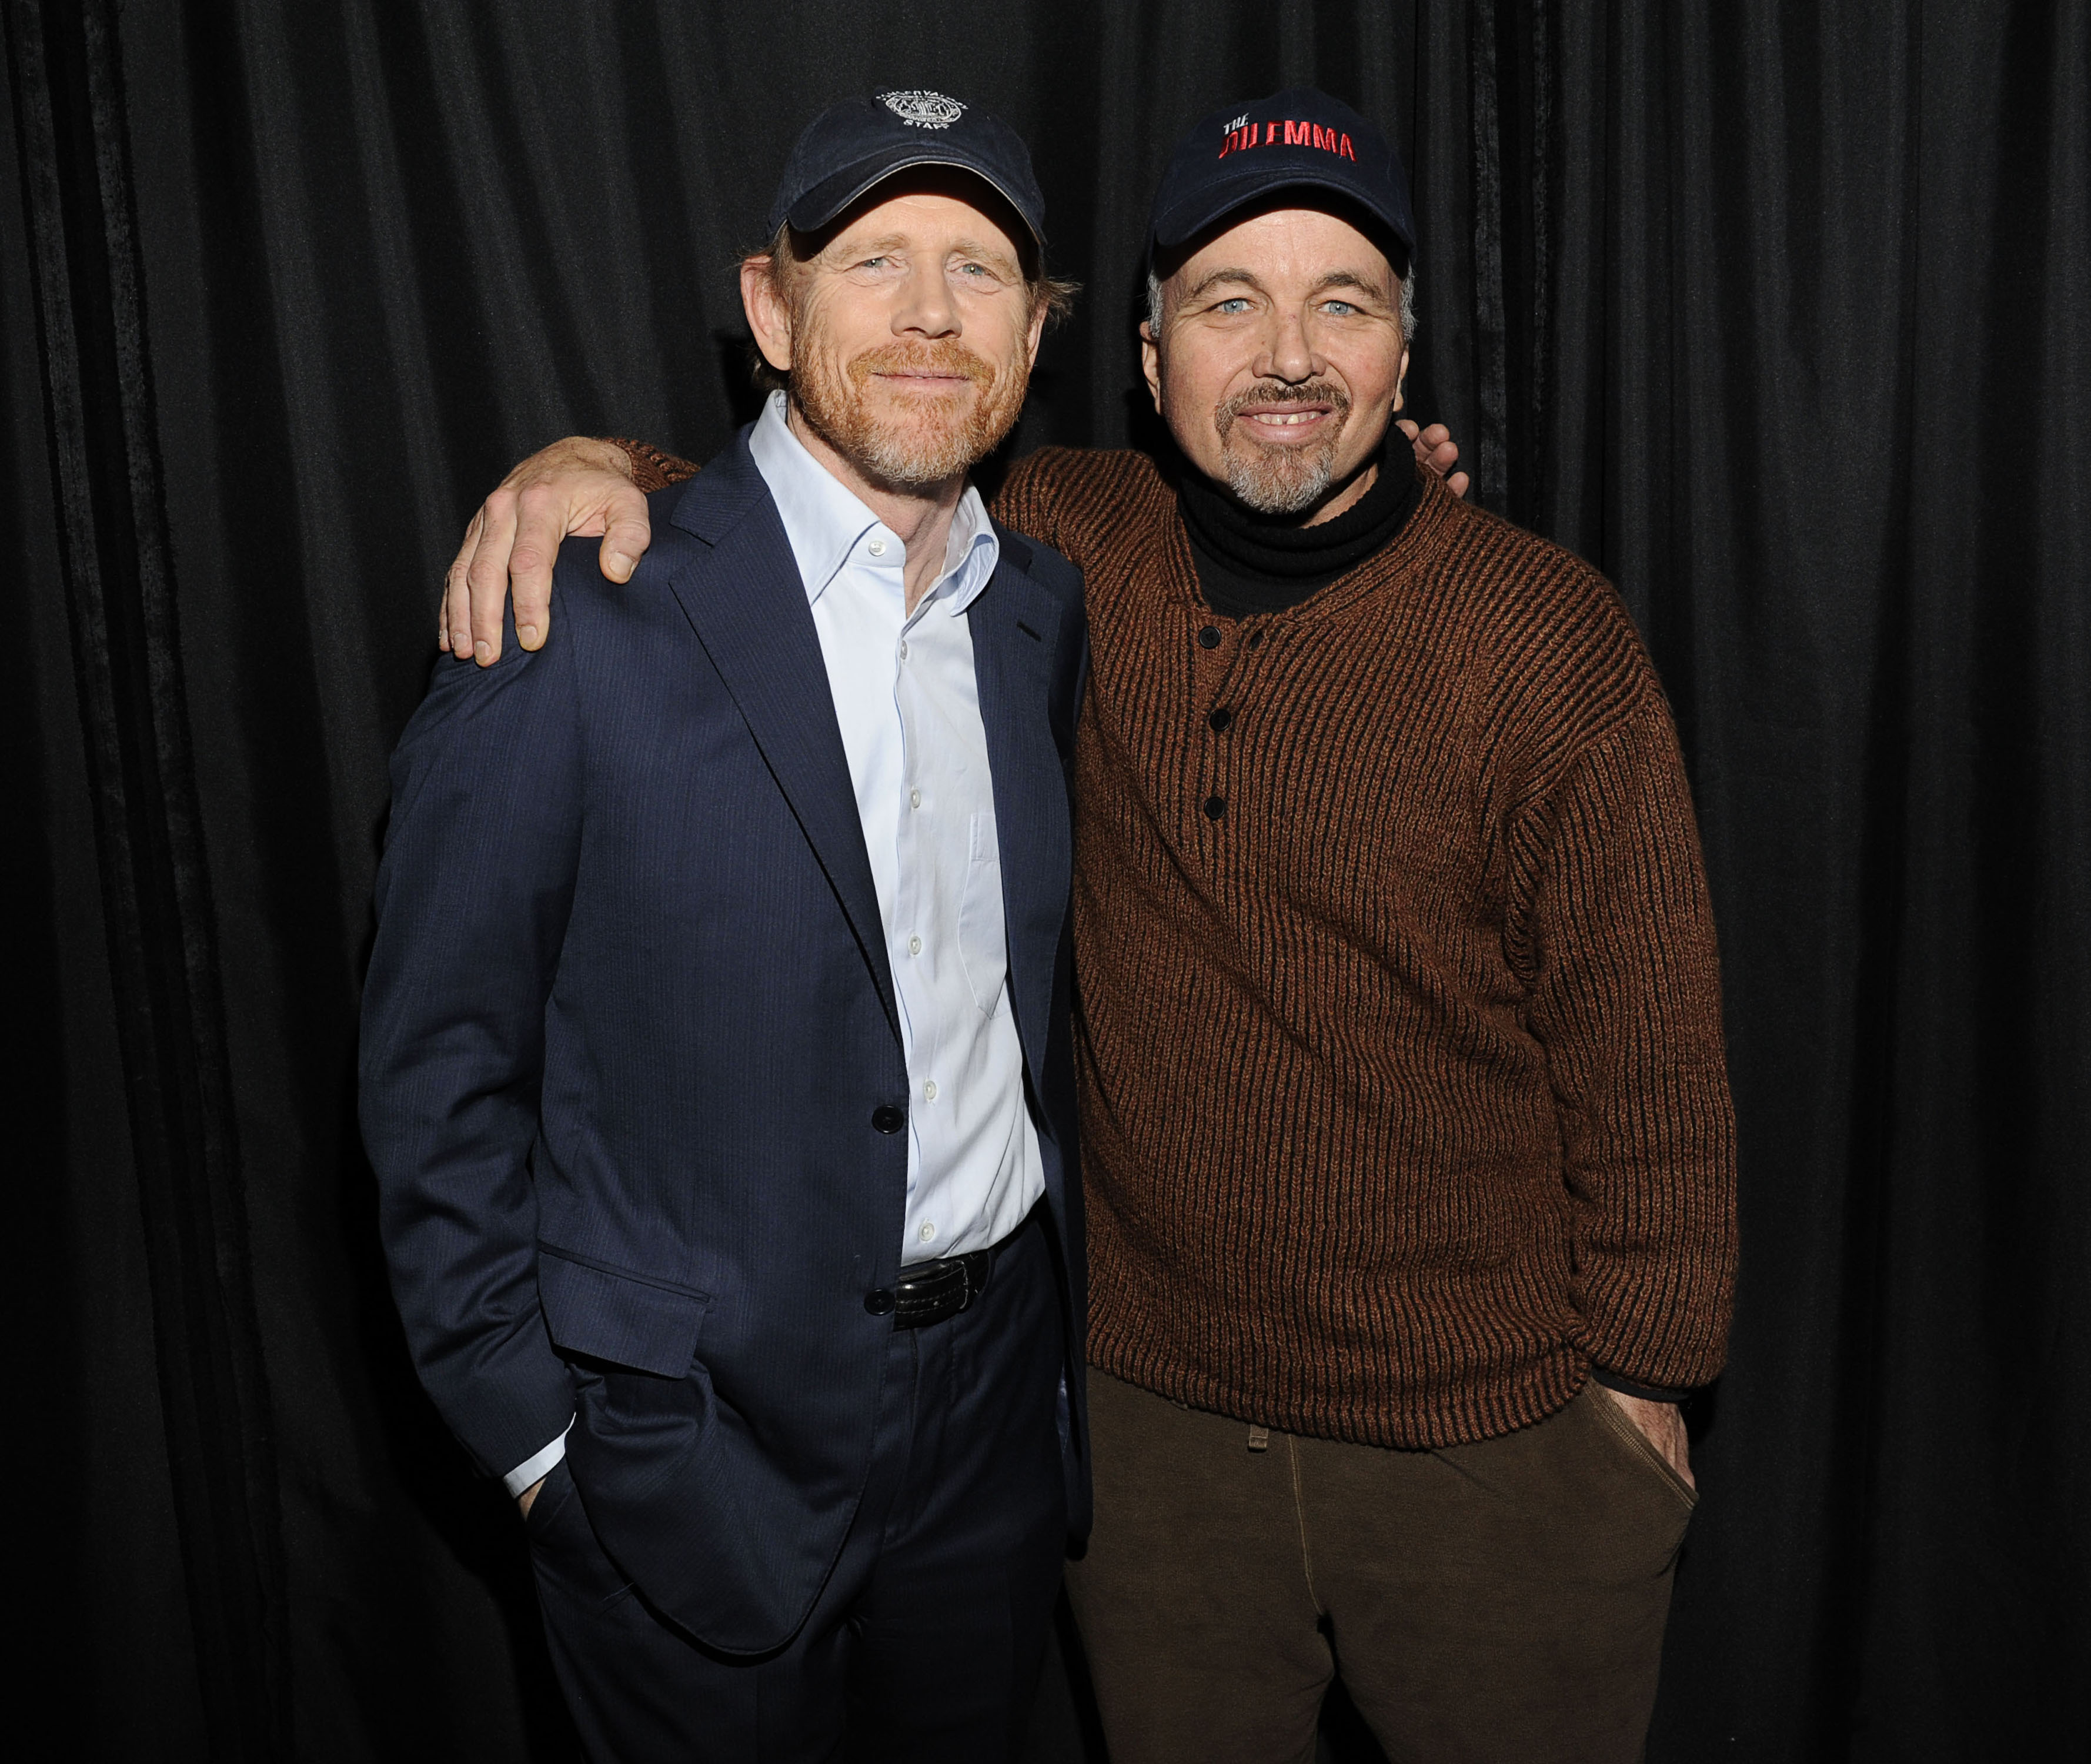 Brothers Ron Howard and Clint Howard pose with arms around each other's shoulders, 2011